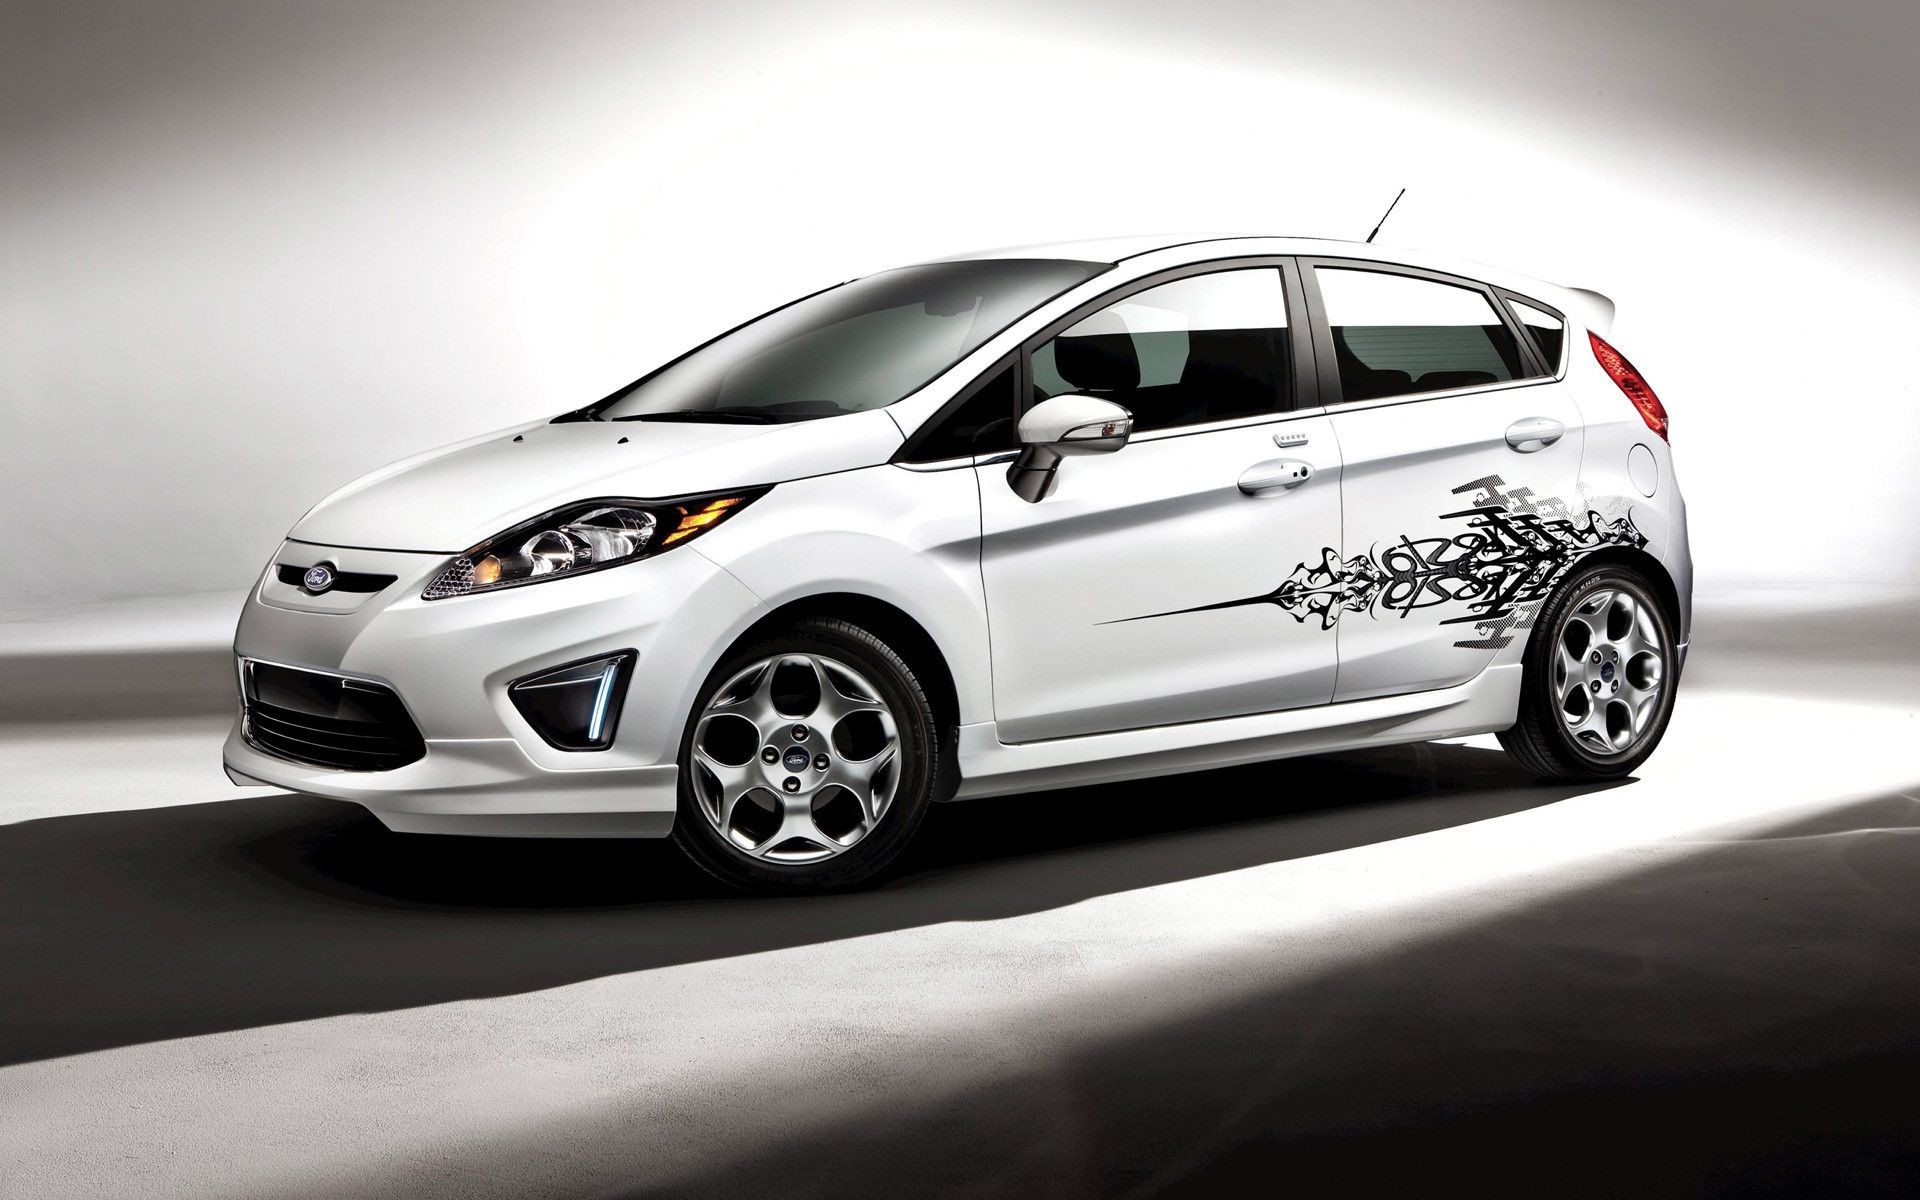 1920x1200 Awesome Ford Fiesta Wallpapers 1